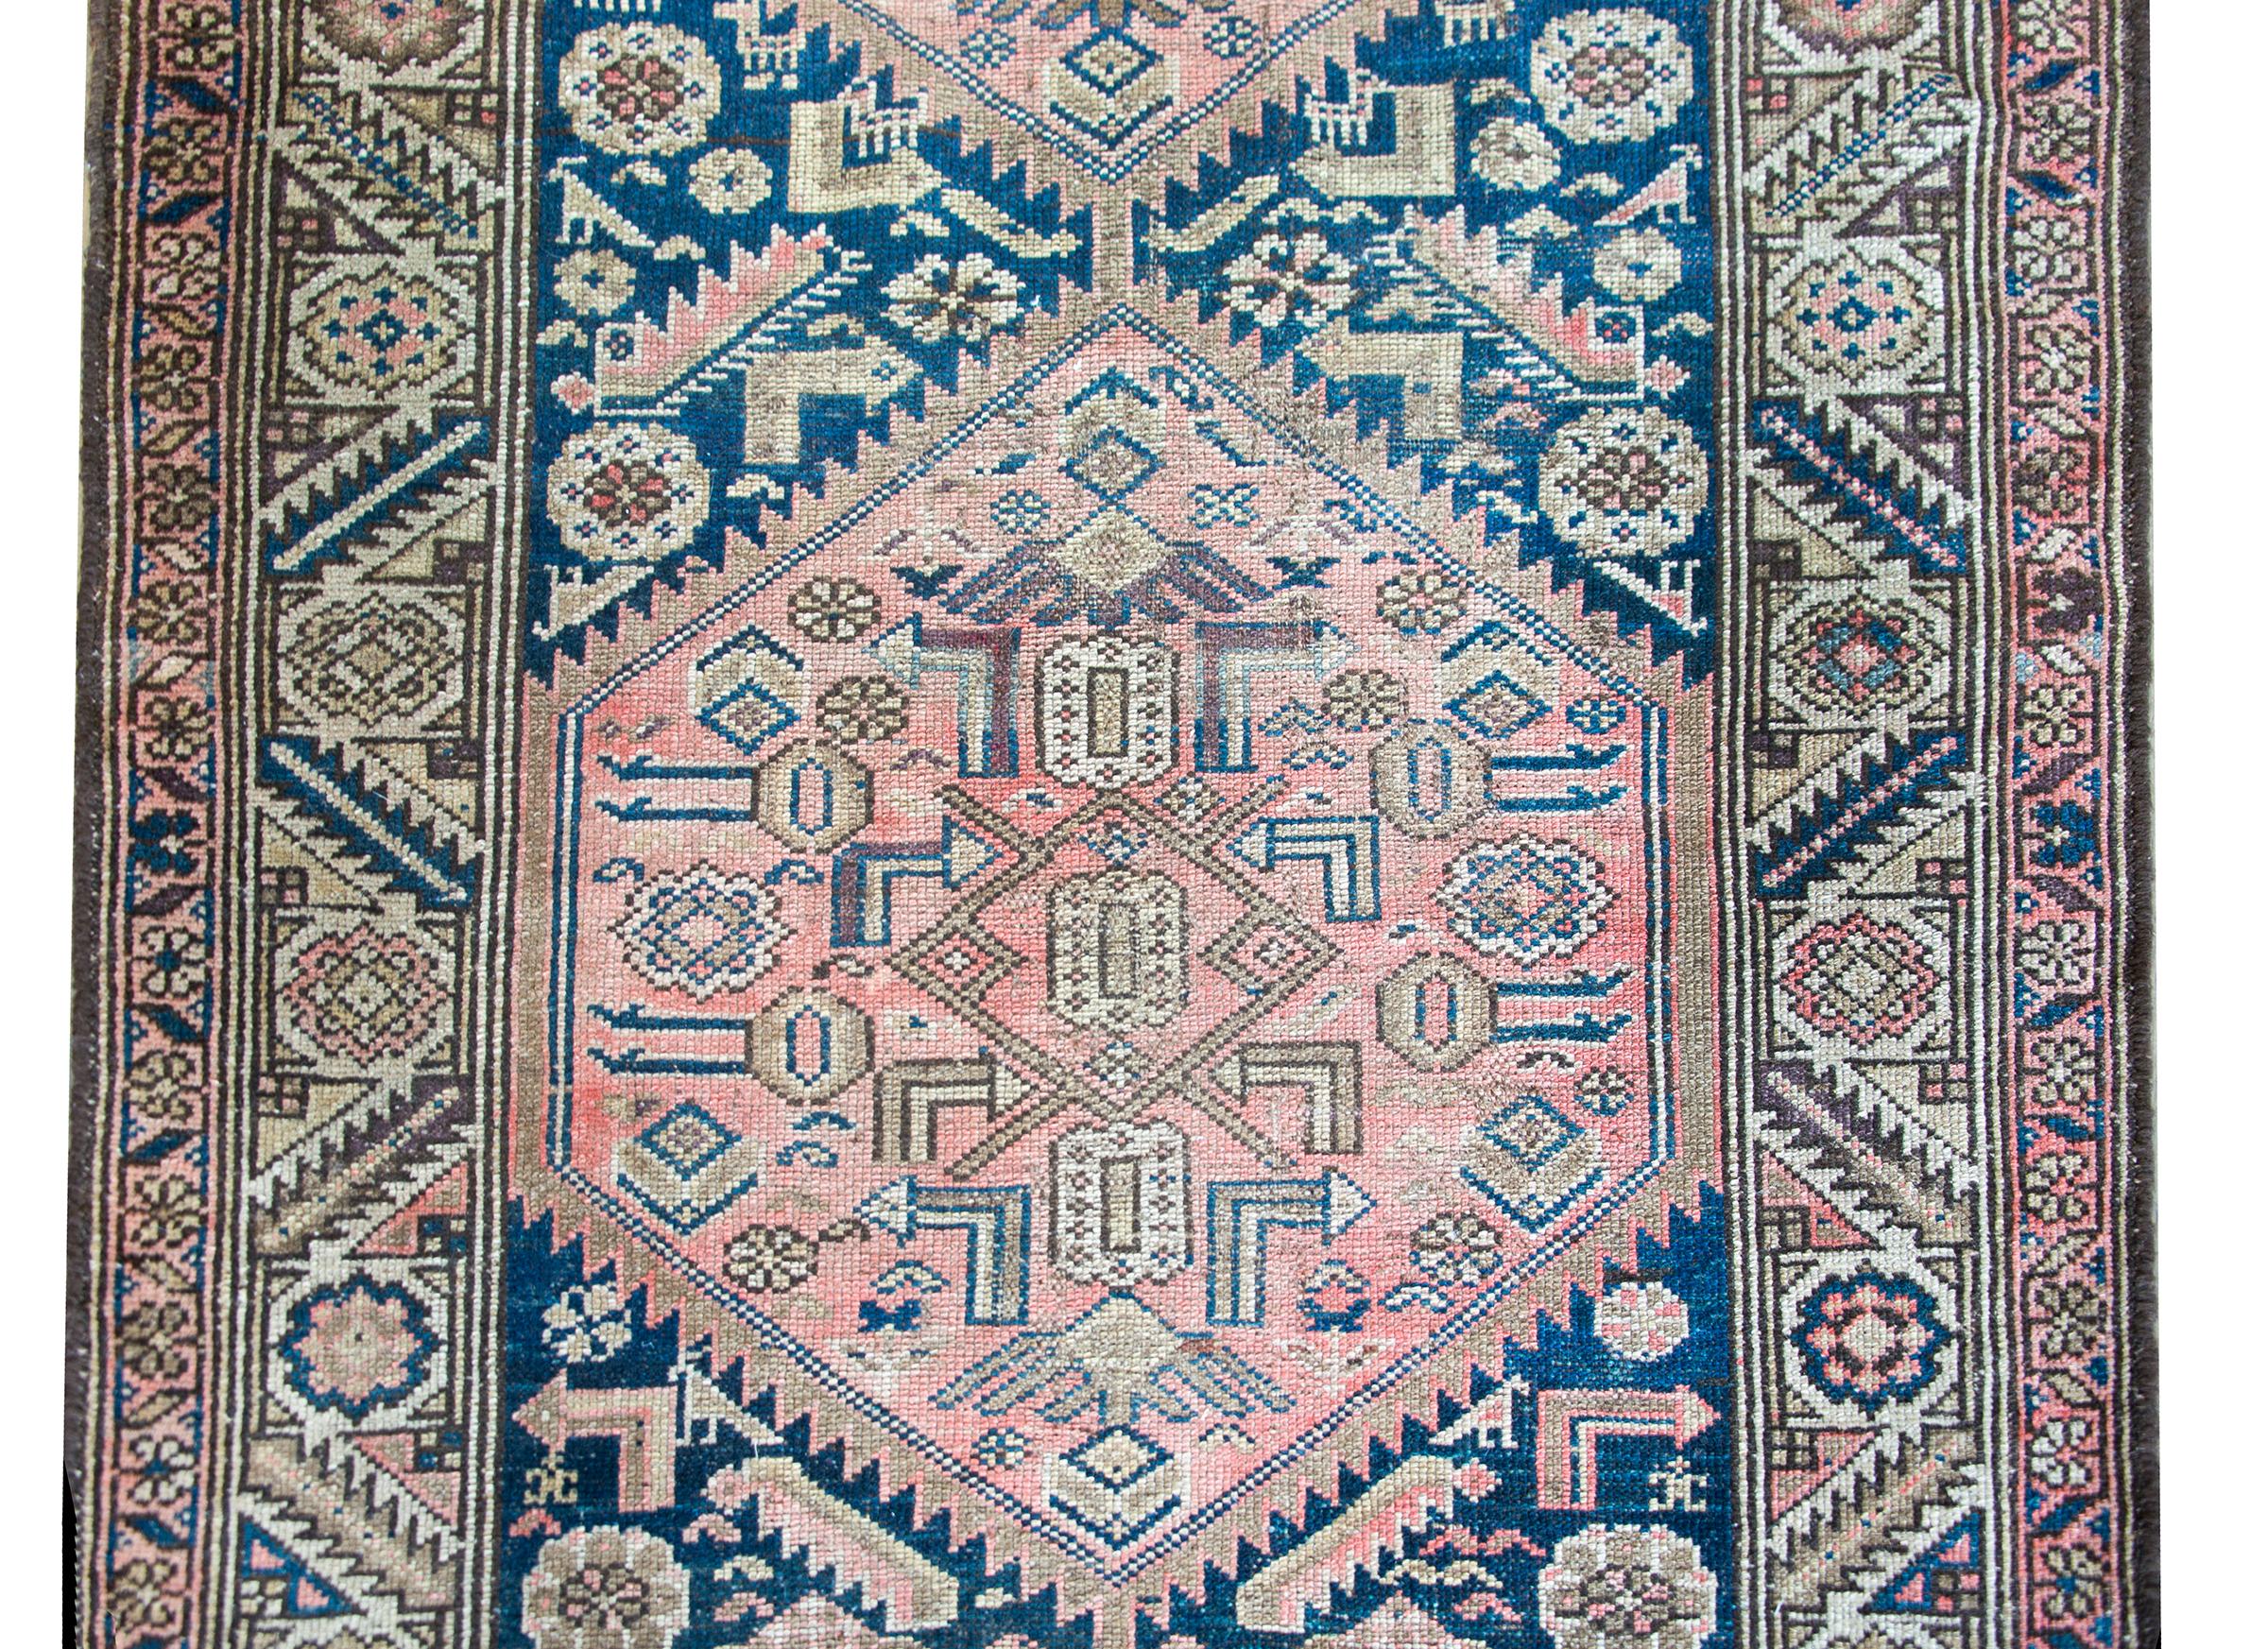 A beautiful early 20th century Persian Hamadan rug with two large medallions with stylized leaves and flowers woven in muted reds, indigos, browns, and creams, set against an indigo field with more stylized flowers and chickens. The border is wide